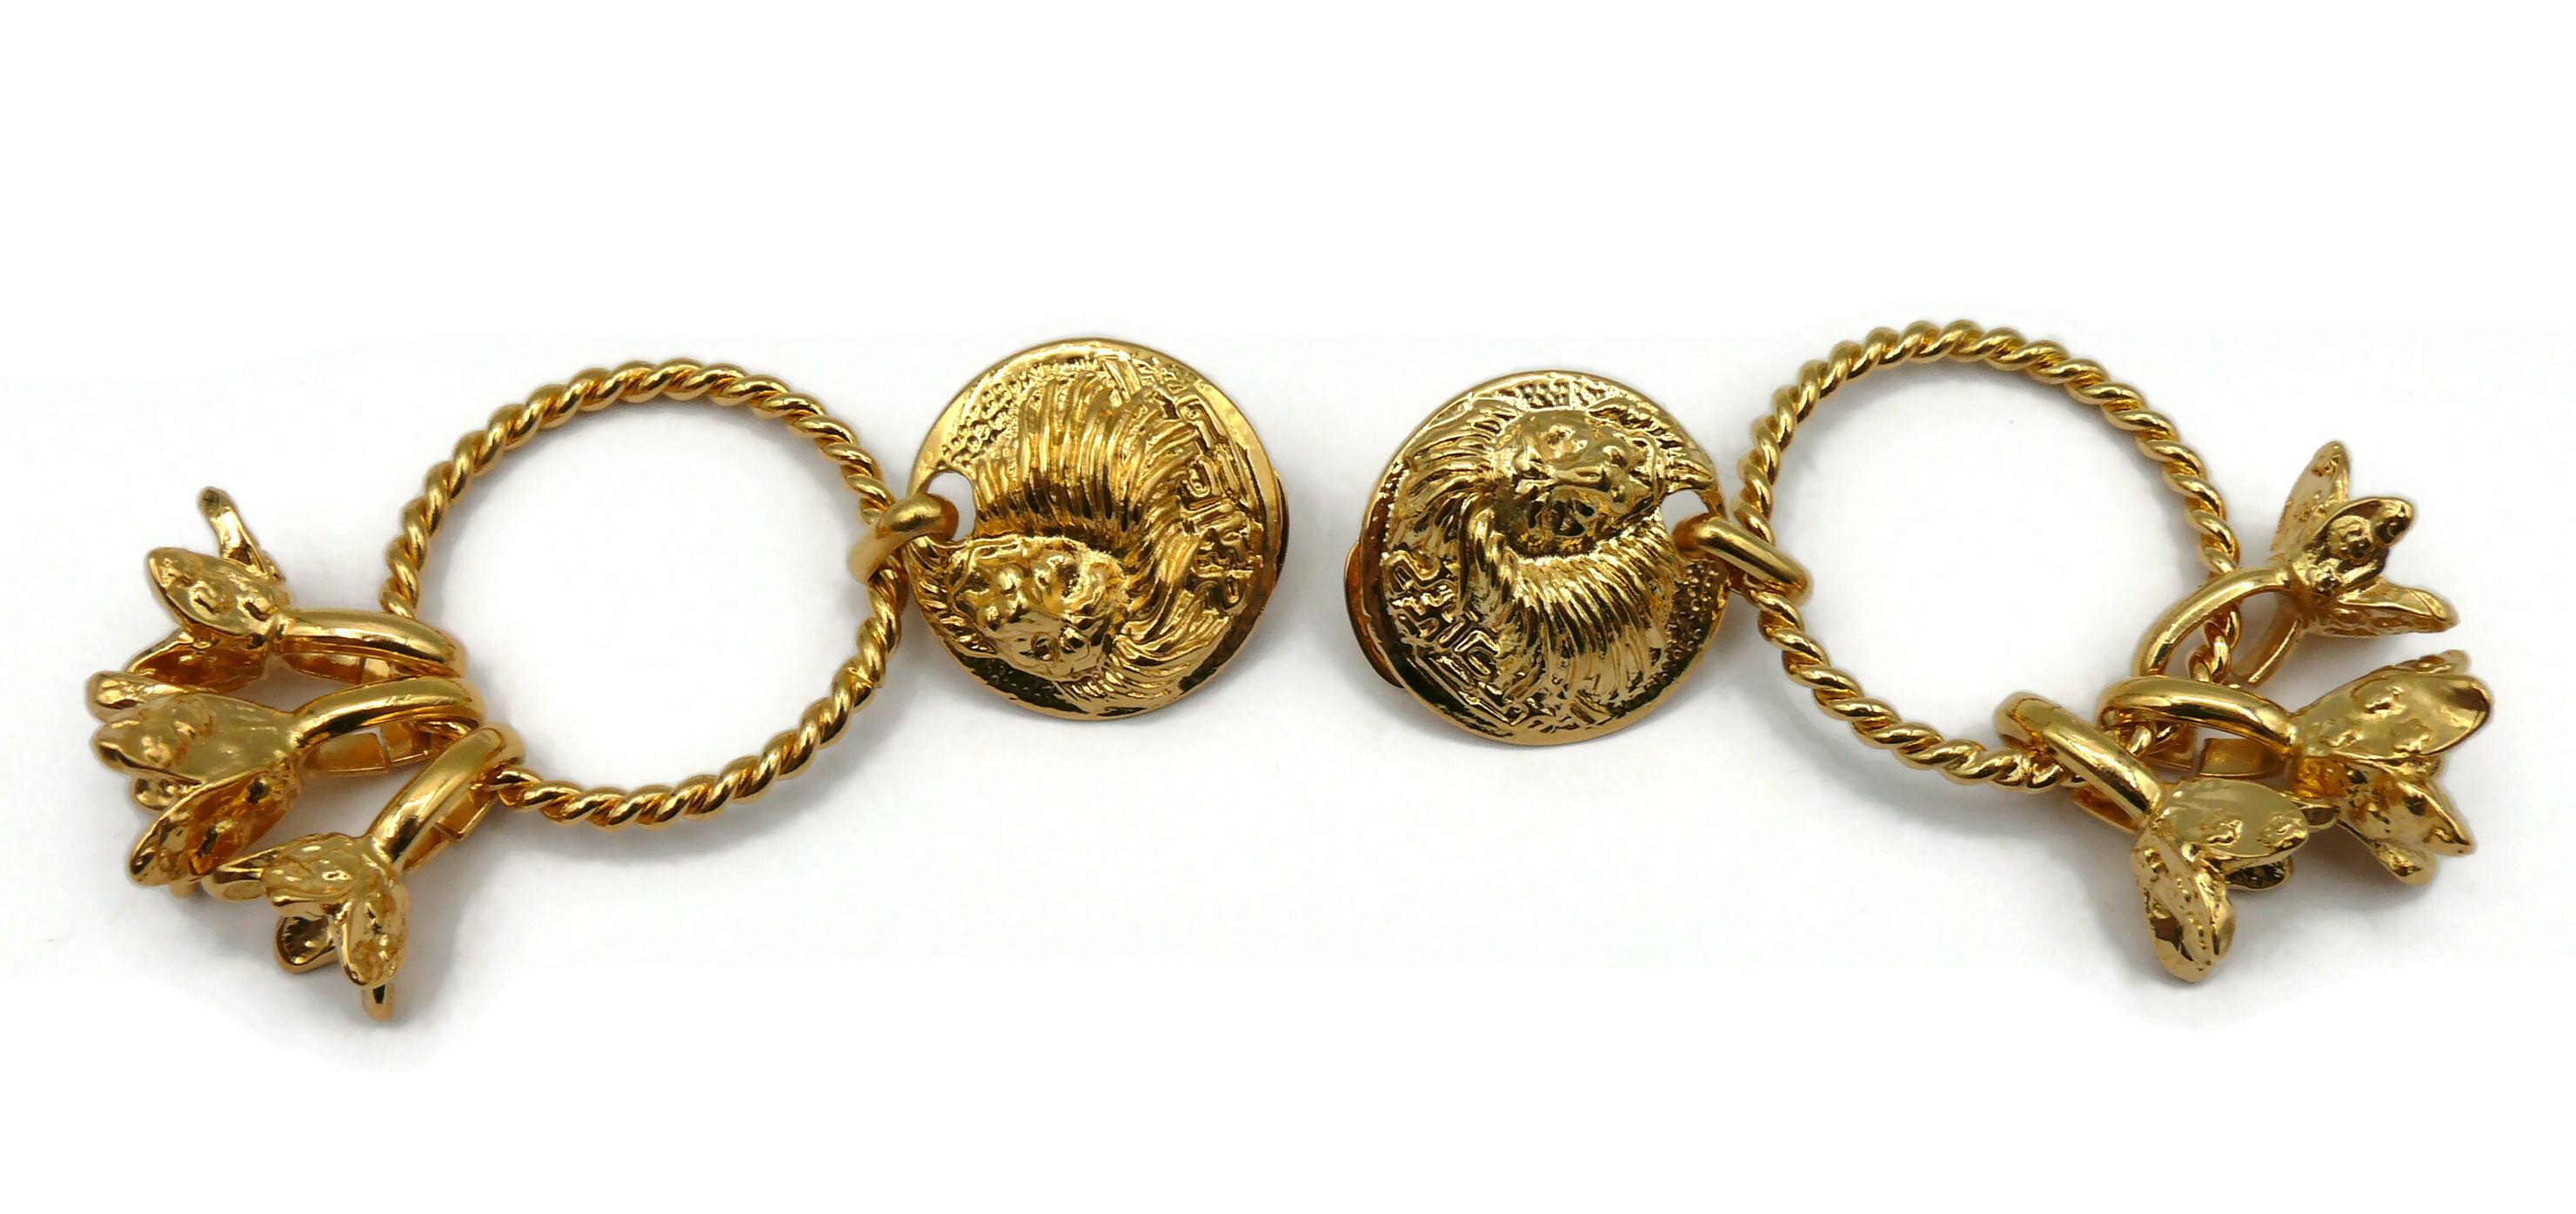 VERSUS by GIANNI VERSACE Vintage Gold Tone Lion Head Dangling Earrings For Sale 2